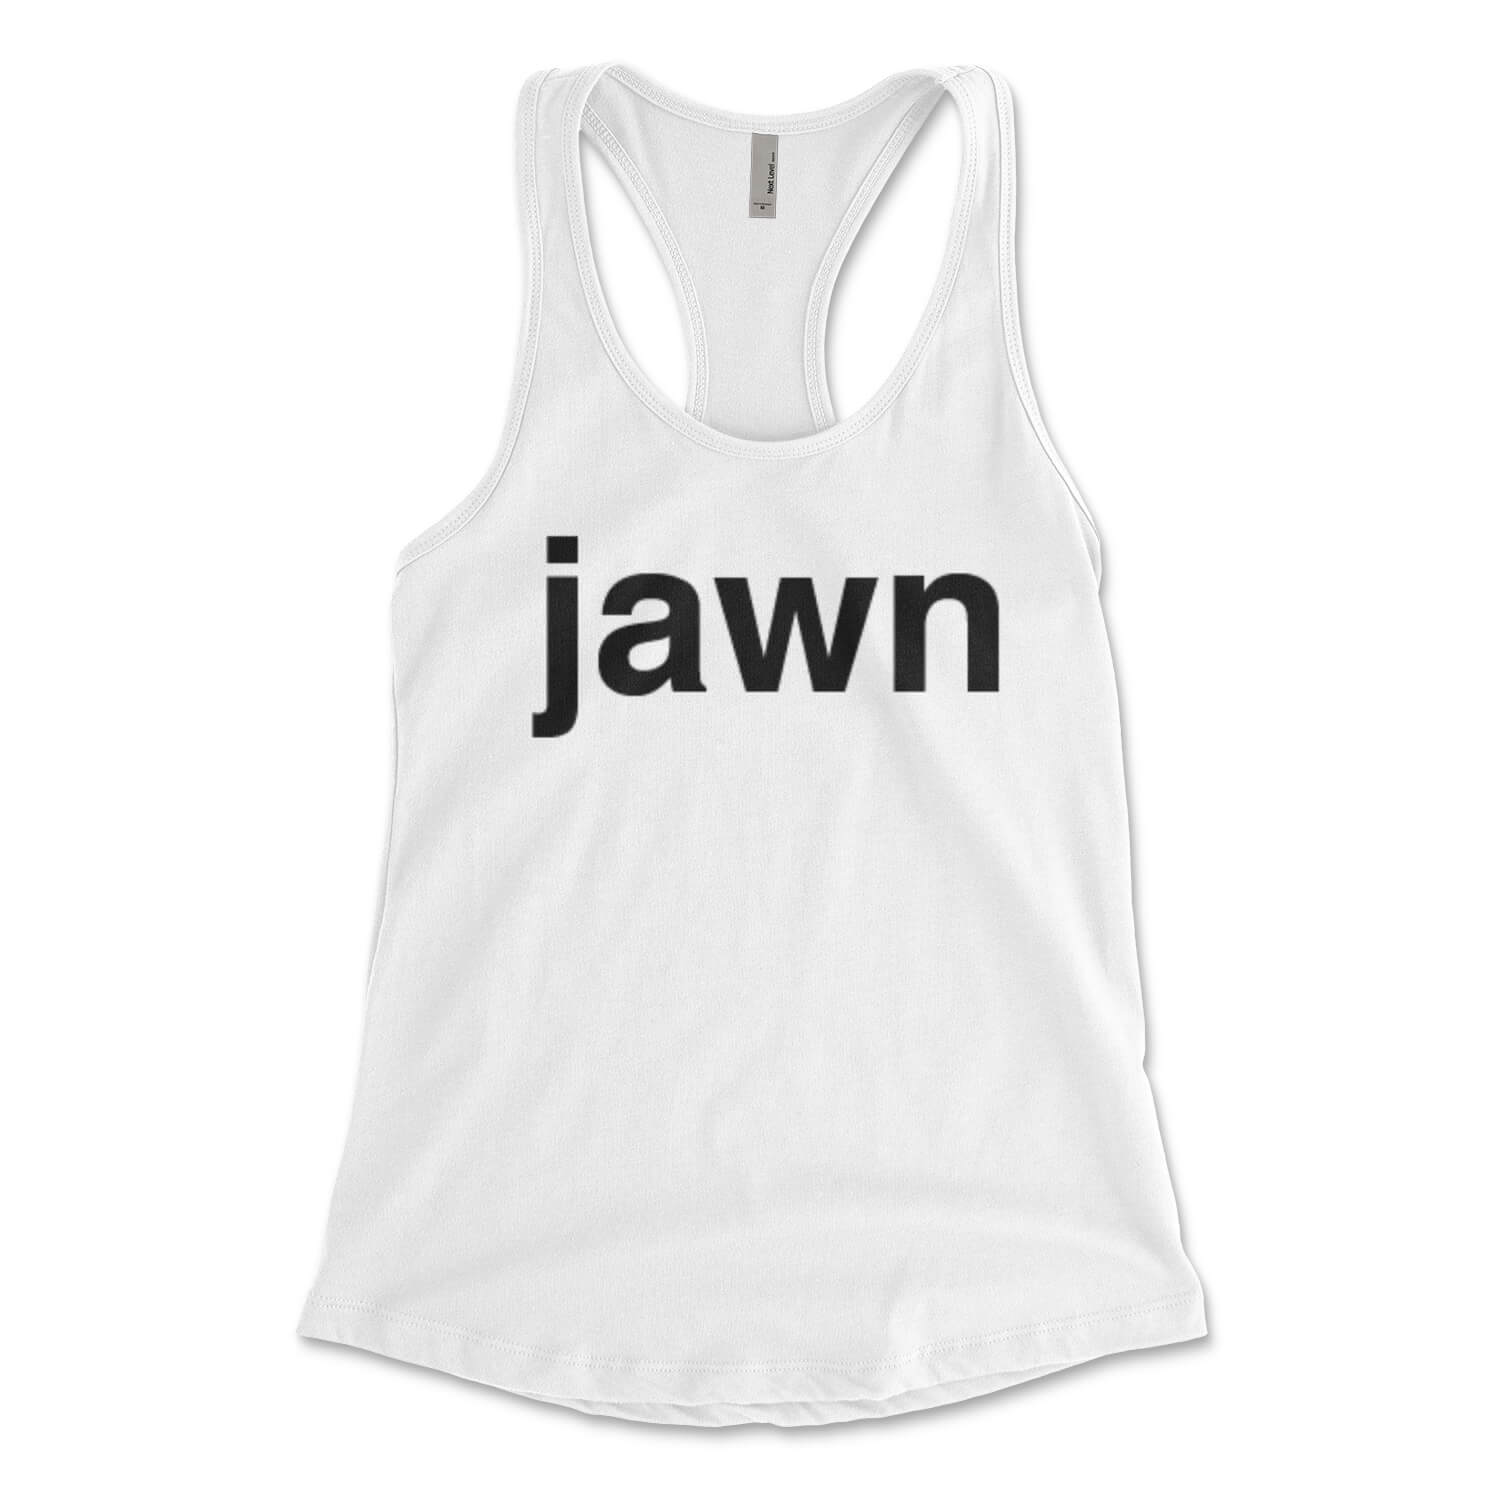 Philadelphia jawn white womens racerback tank top from Phillygoat